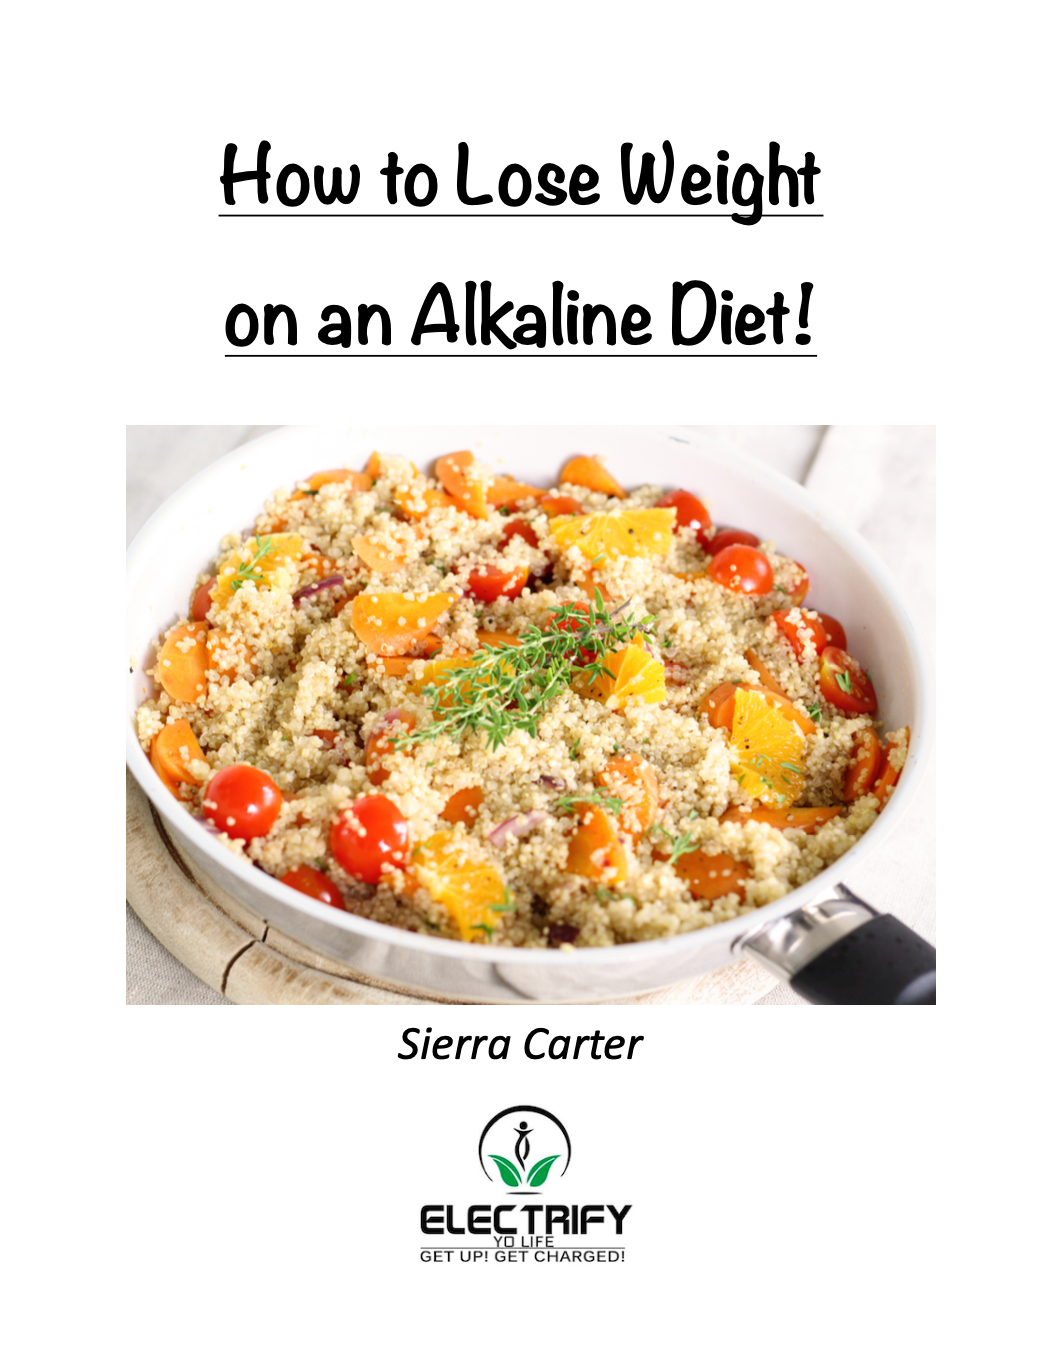 How to Lose Weight on an Alkaline Diet